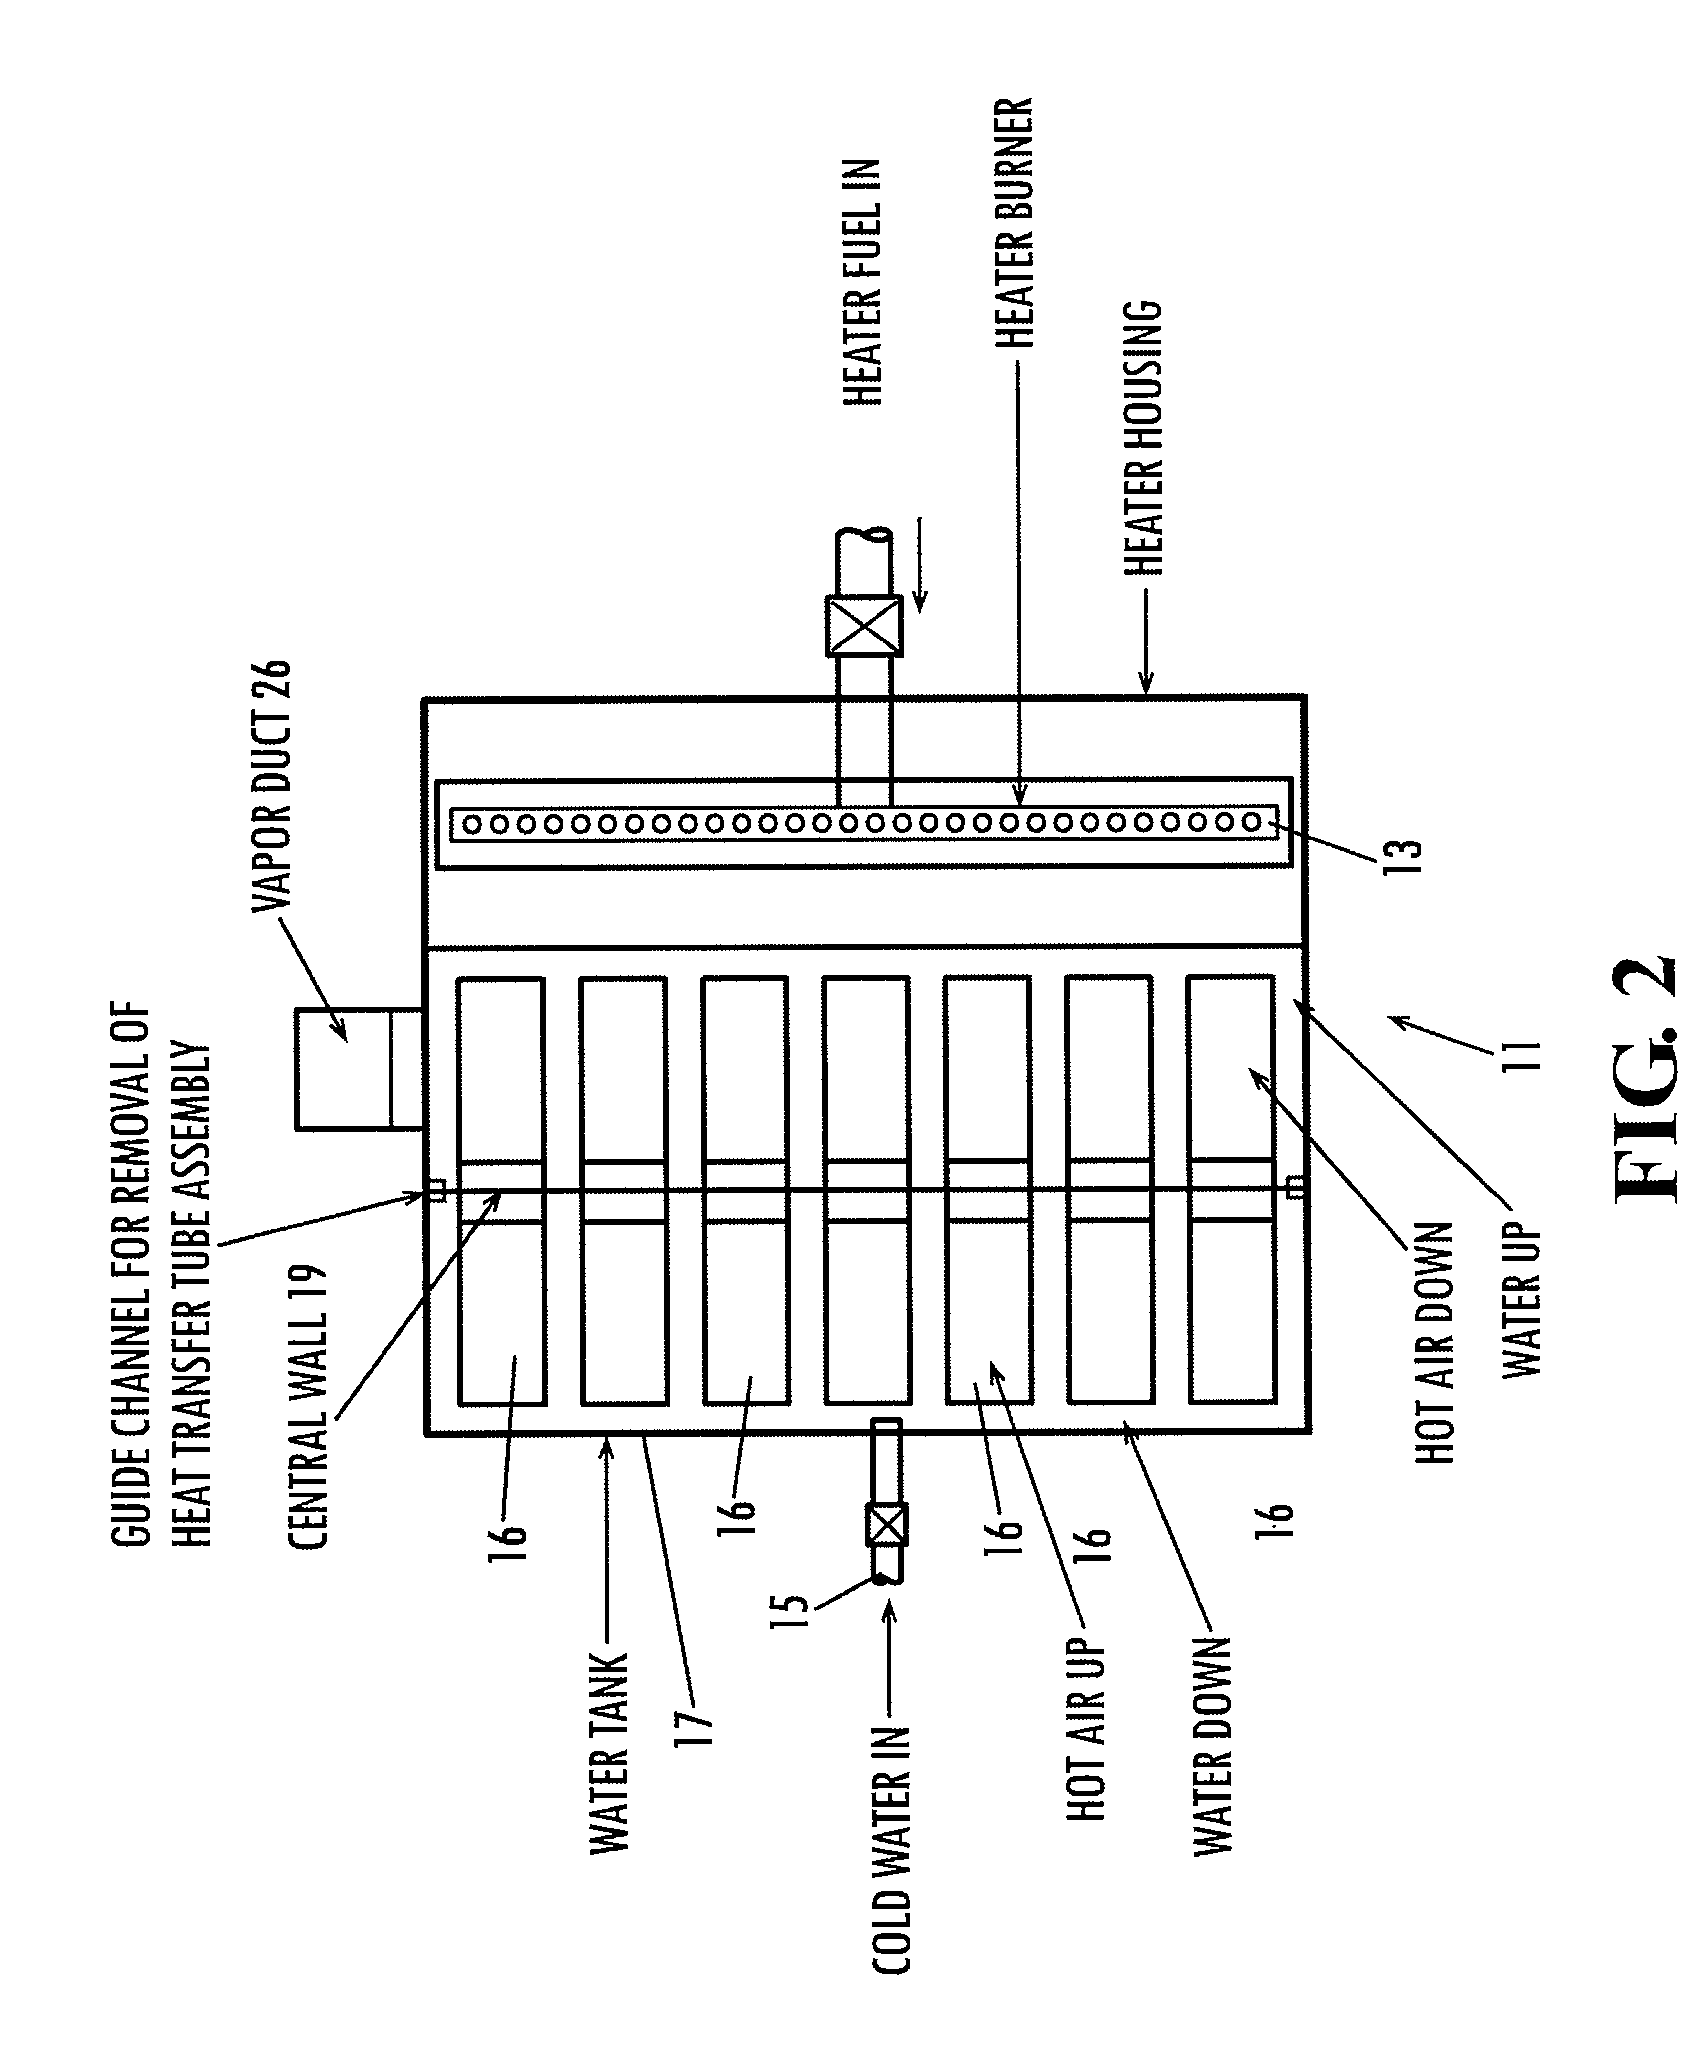 Method, apparatus and system for adding moisture to cotton fibers during the cotton ginning process